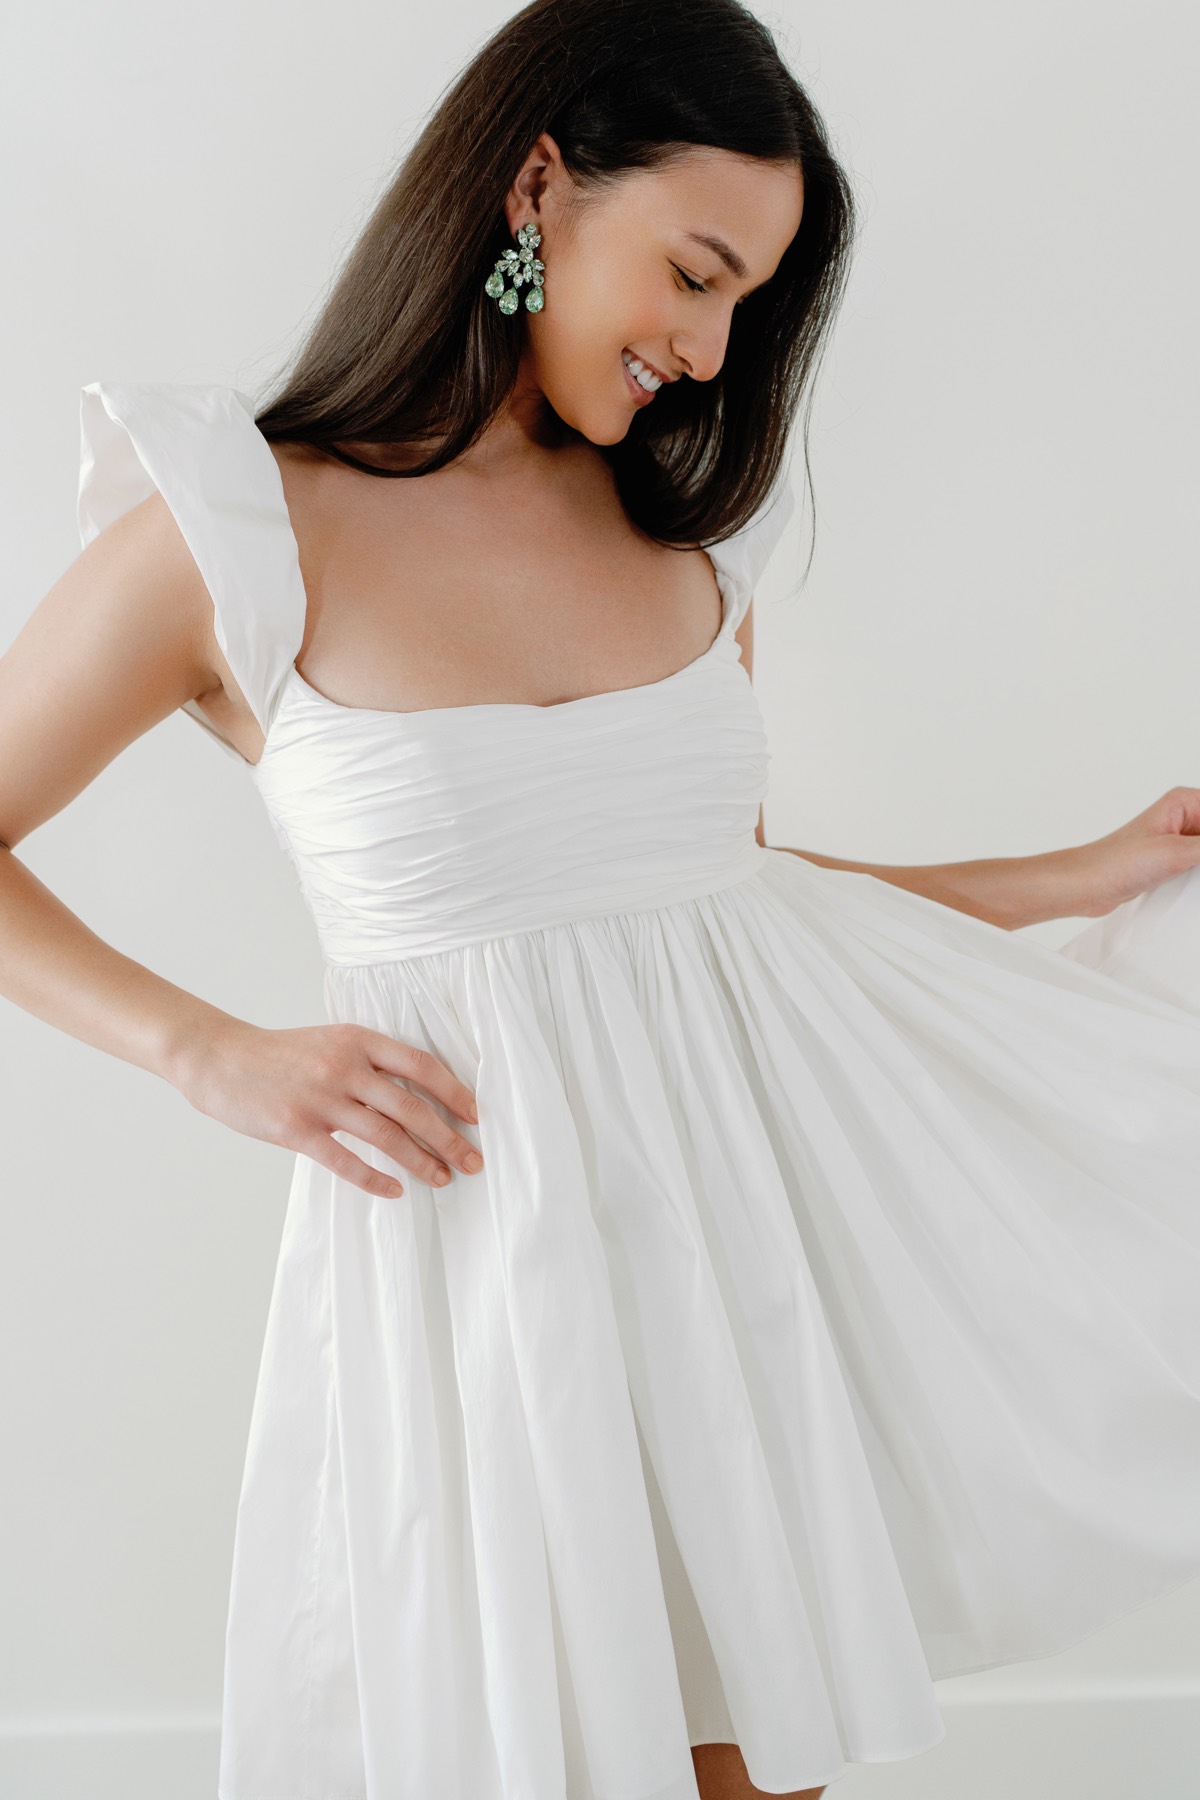 By Watters Trifle in 2023  Wedding dress shopping, Budget dresses, Little  white dresses